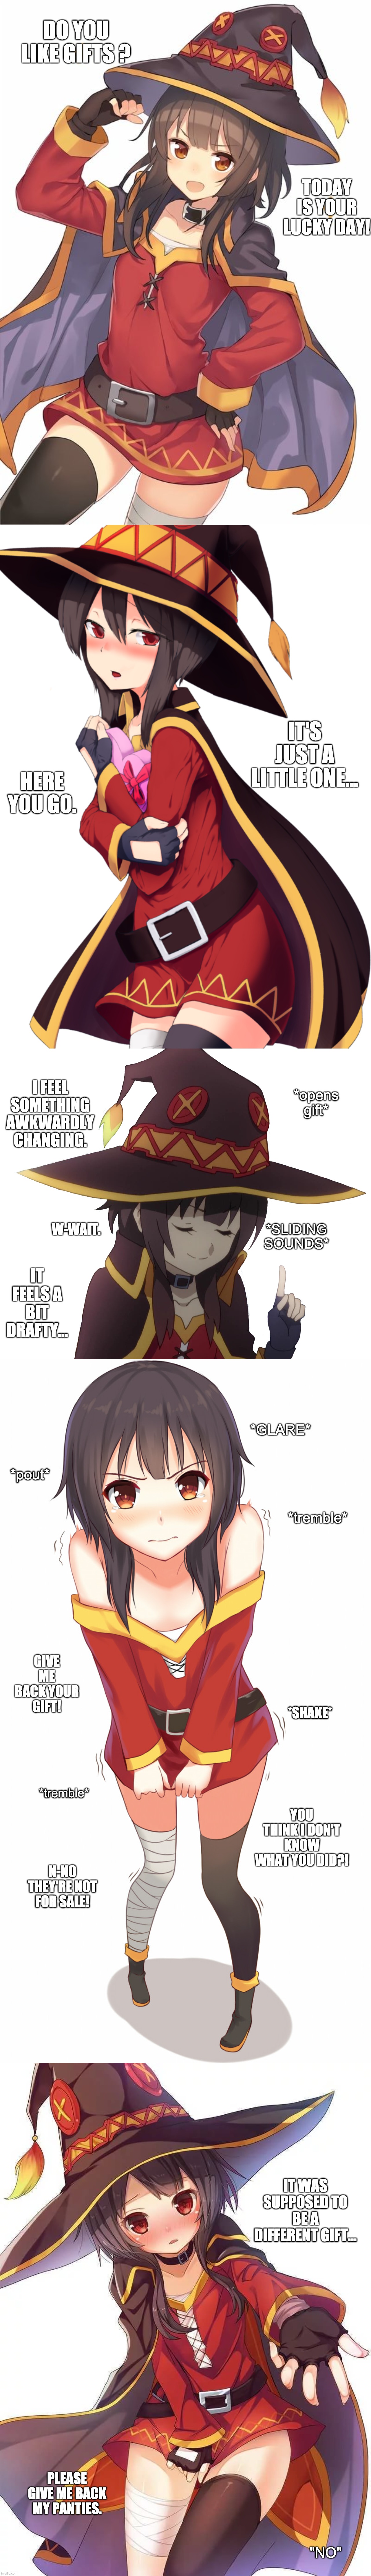 Megumin offers you a gift. | DO YOU LIKE GIFTS ? TODAY IS YOUR LUCKY DAY! IT'S JUST A LITTLE ONE... HERE YOU GO. *opens gift*; I FEEL SOMETHING AWKWARDLY CHANGING. W-WAIT. *SLIDING SOUNDS*; IT FEELS A BIT DRAFTY... *GLARE*; *pout*; *tremble*; GIVE ME BACK YOUR GIFT! *SHAKE*; YOU THINK I DON'T KNOW WHAT YOU DID?! *tremble*; N-NO THEY'RE NOT FOR SALE! IT WAS SUPPOSED TO BE A DIFFERENT GIFT... PLEASE GIVE ME BACK MY PANTIES. "NO" | image tagged in memes,funny,anime,megumin,pretty girl,gift | made w/ Imgflip meme maker